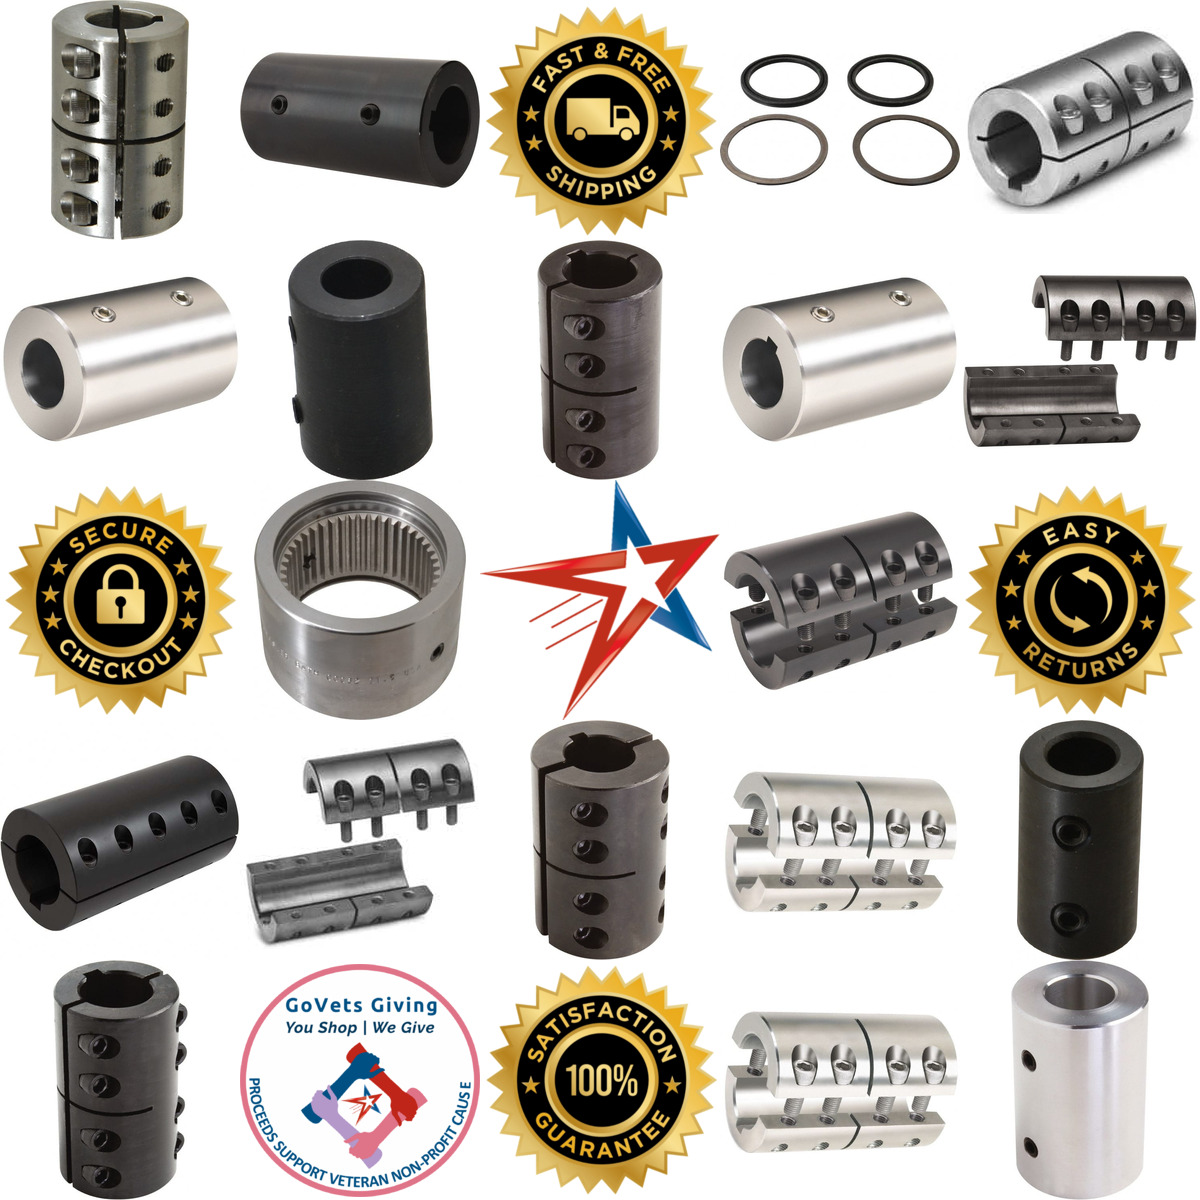 A selection of Rigid Couplings products on GoVets